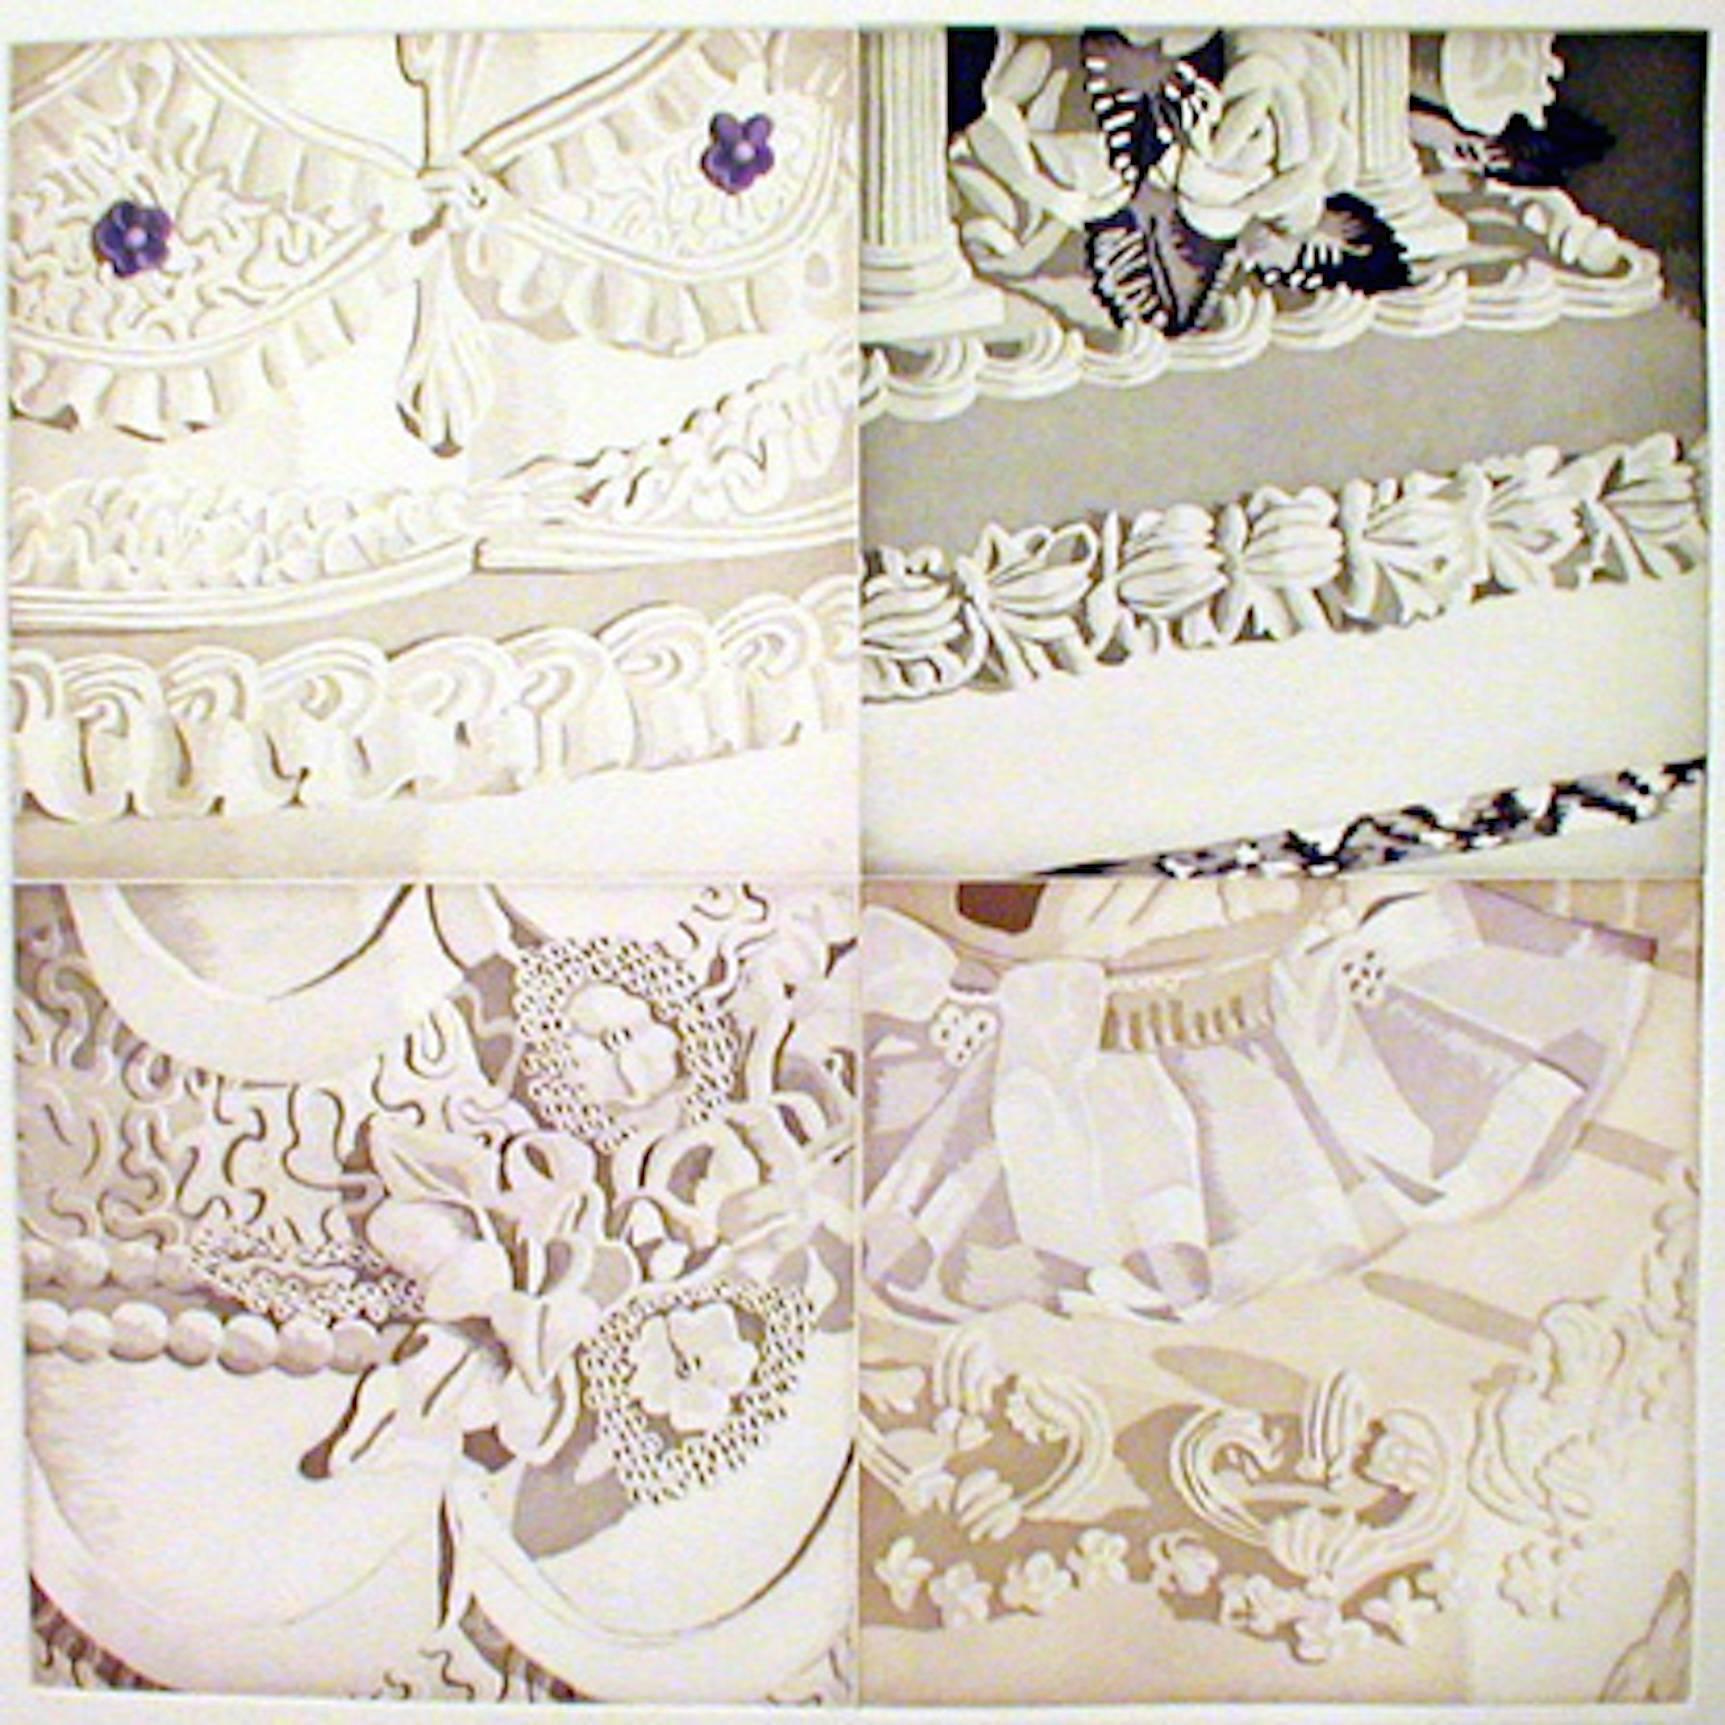 Julia Jacquette Still-Life Print - White on White (Four Sections of Wedding Cake)